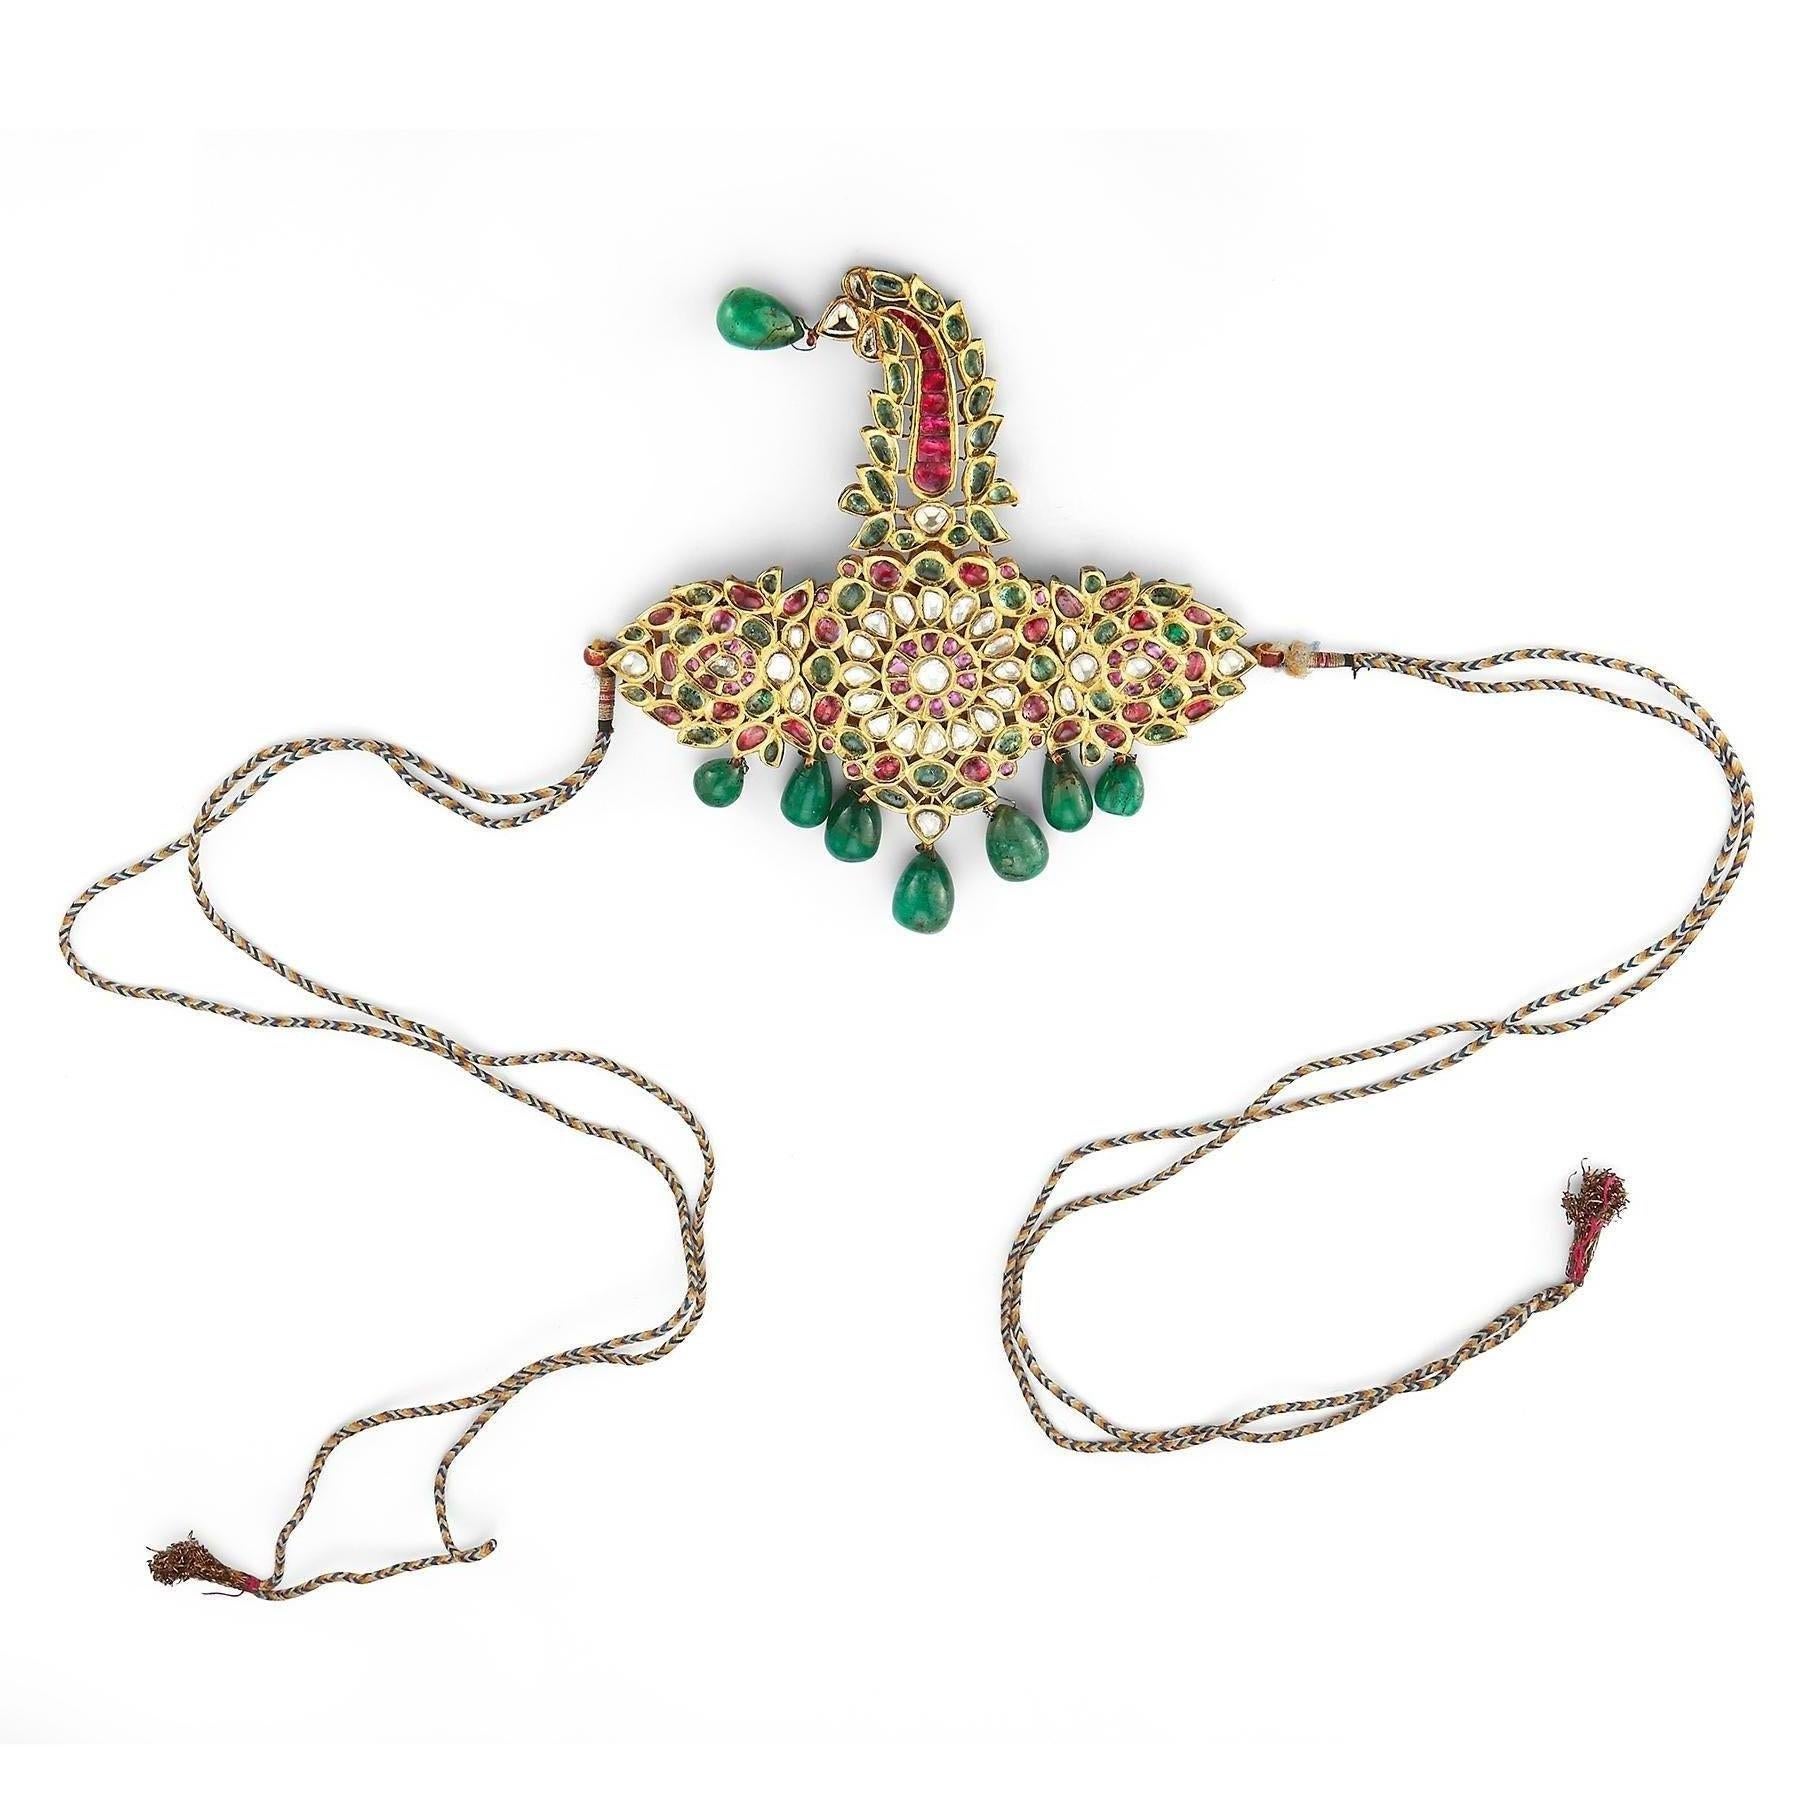 Museum Quality Antique Indian Sarpech Necklace 

Rose cut emeralds, rubies & diamonds set in 22k gold with 8 emerald bead drops. Reverse with very fine hand enamel designs.
With adjustable cord

Originally a turban ornament, it can be worn as a